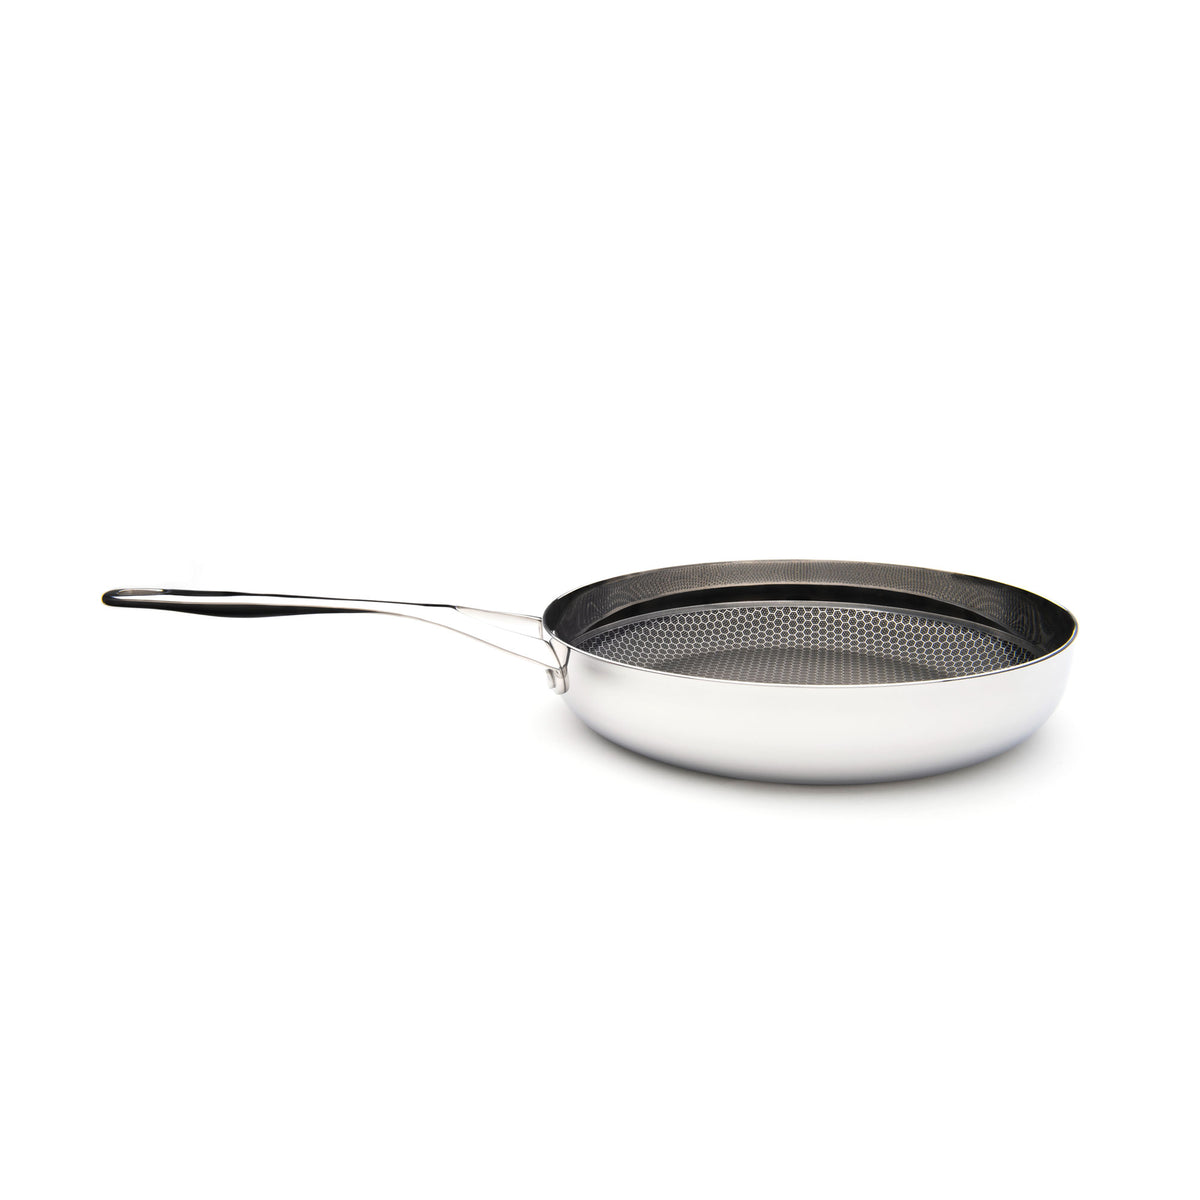 Oven Safe 304 Stainless Steel Frying Pan Wooden Handle Open